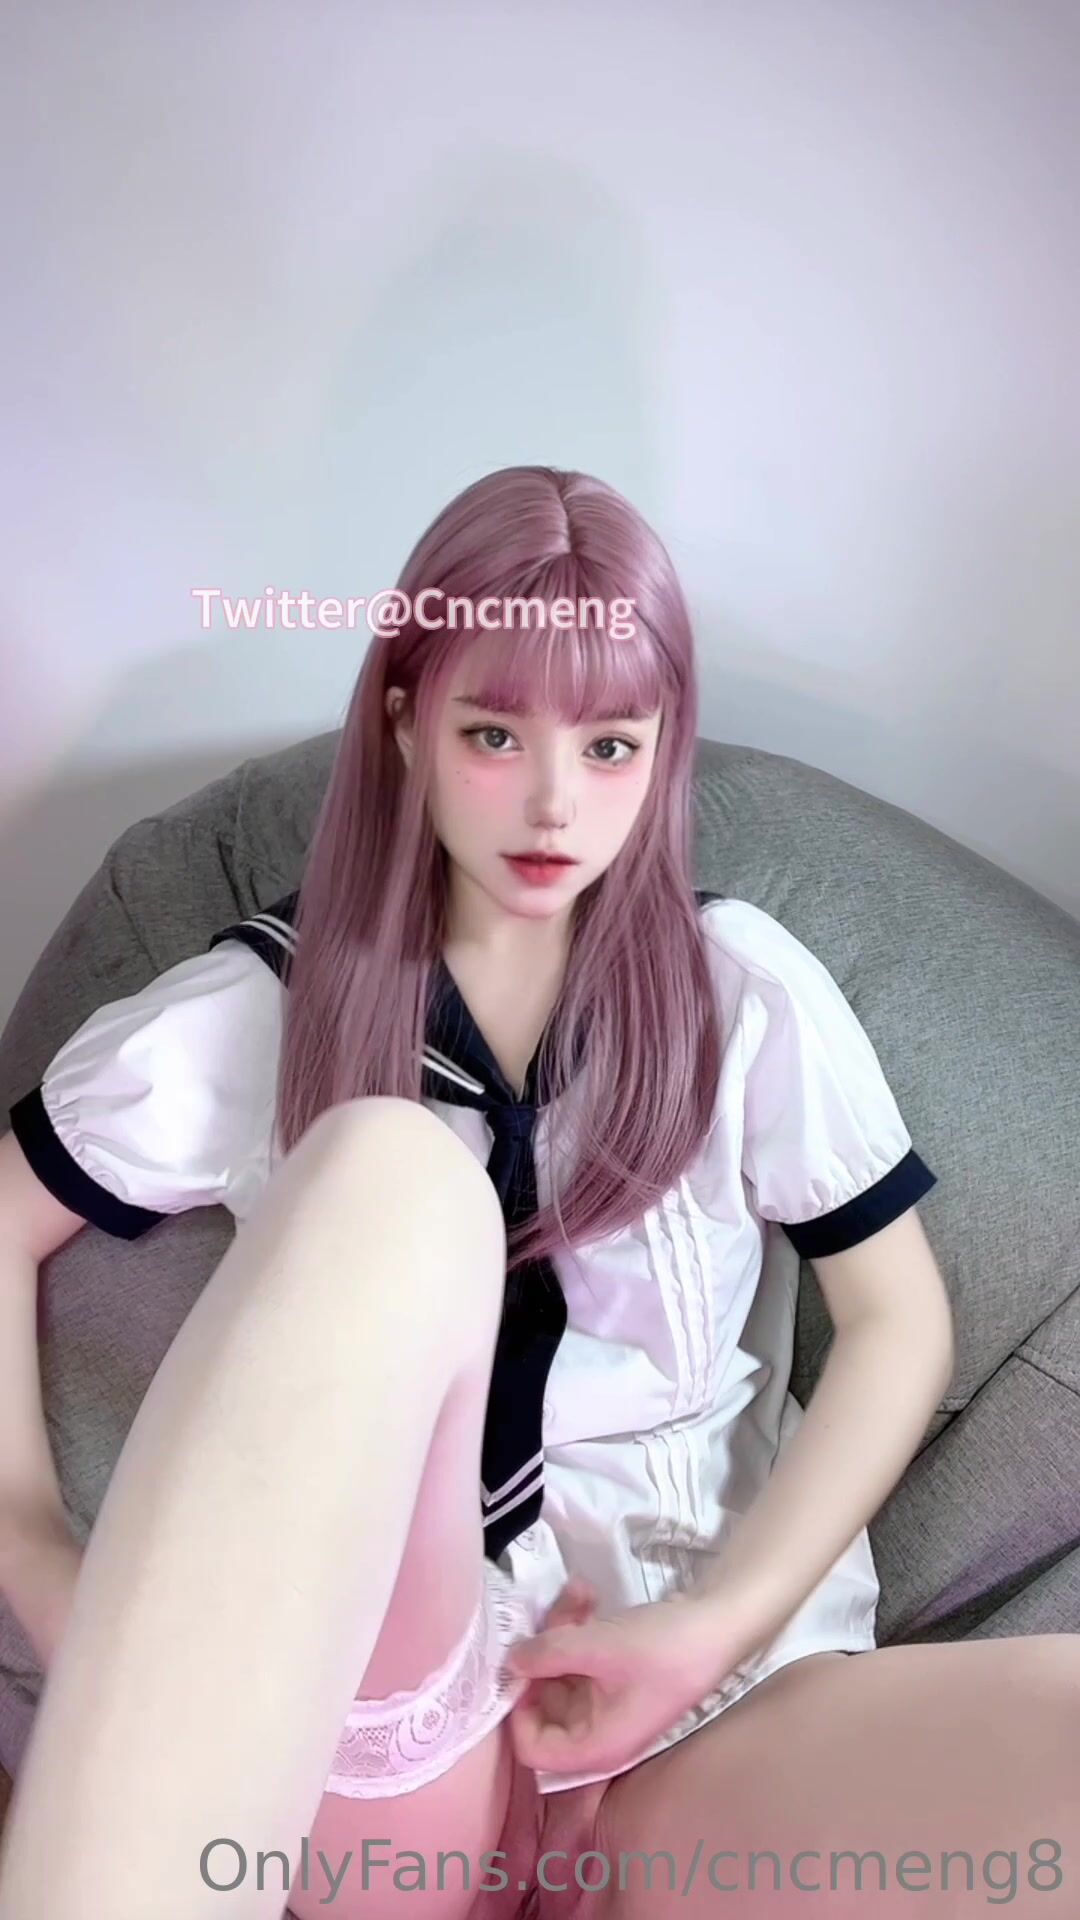 CNCMeng Asian Schoolgirl Puts On Pantyhose And Shows Off Feet OF 3 Min